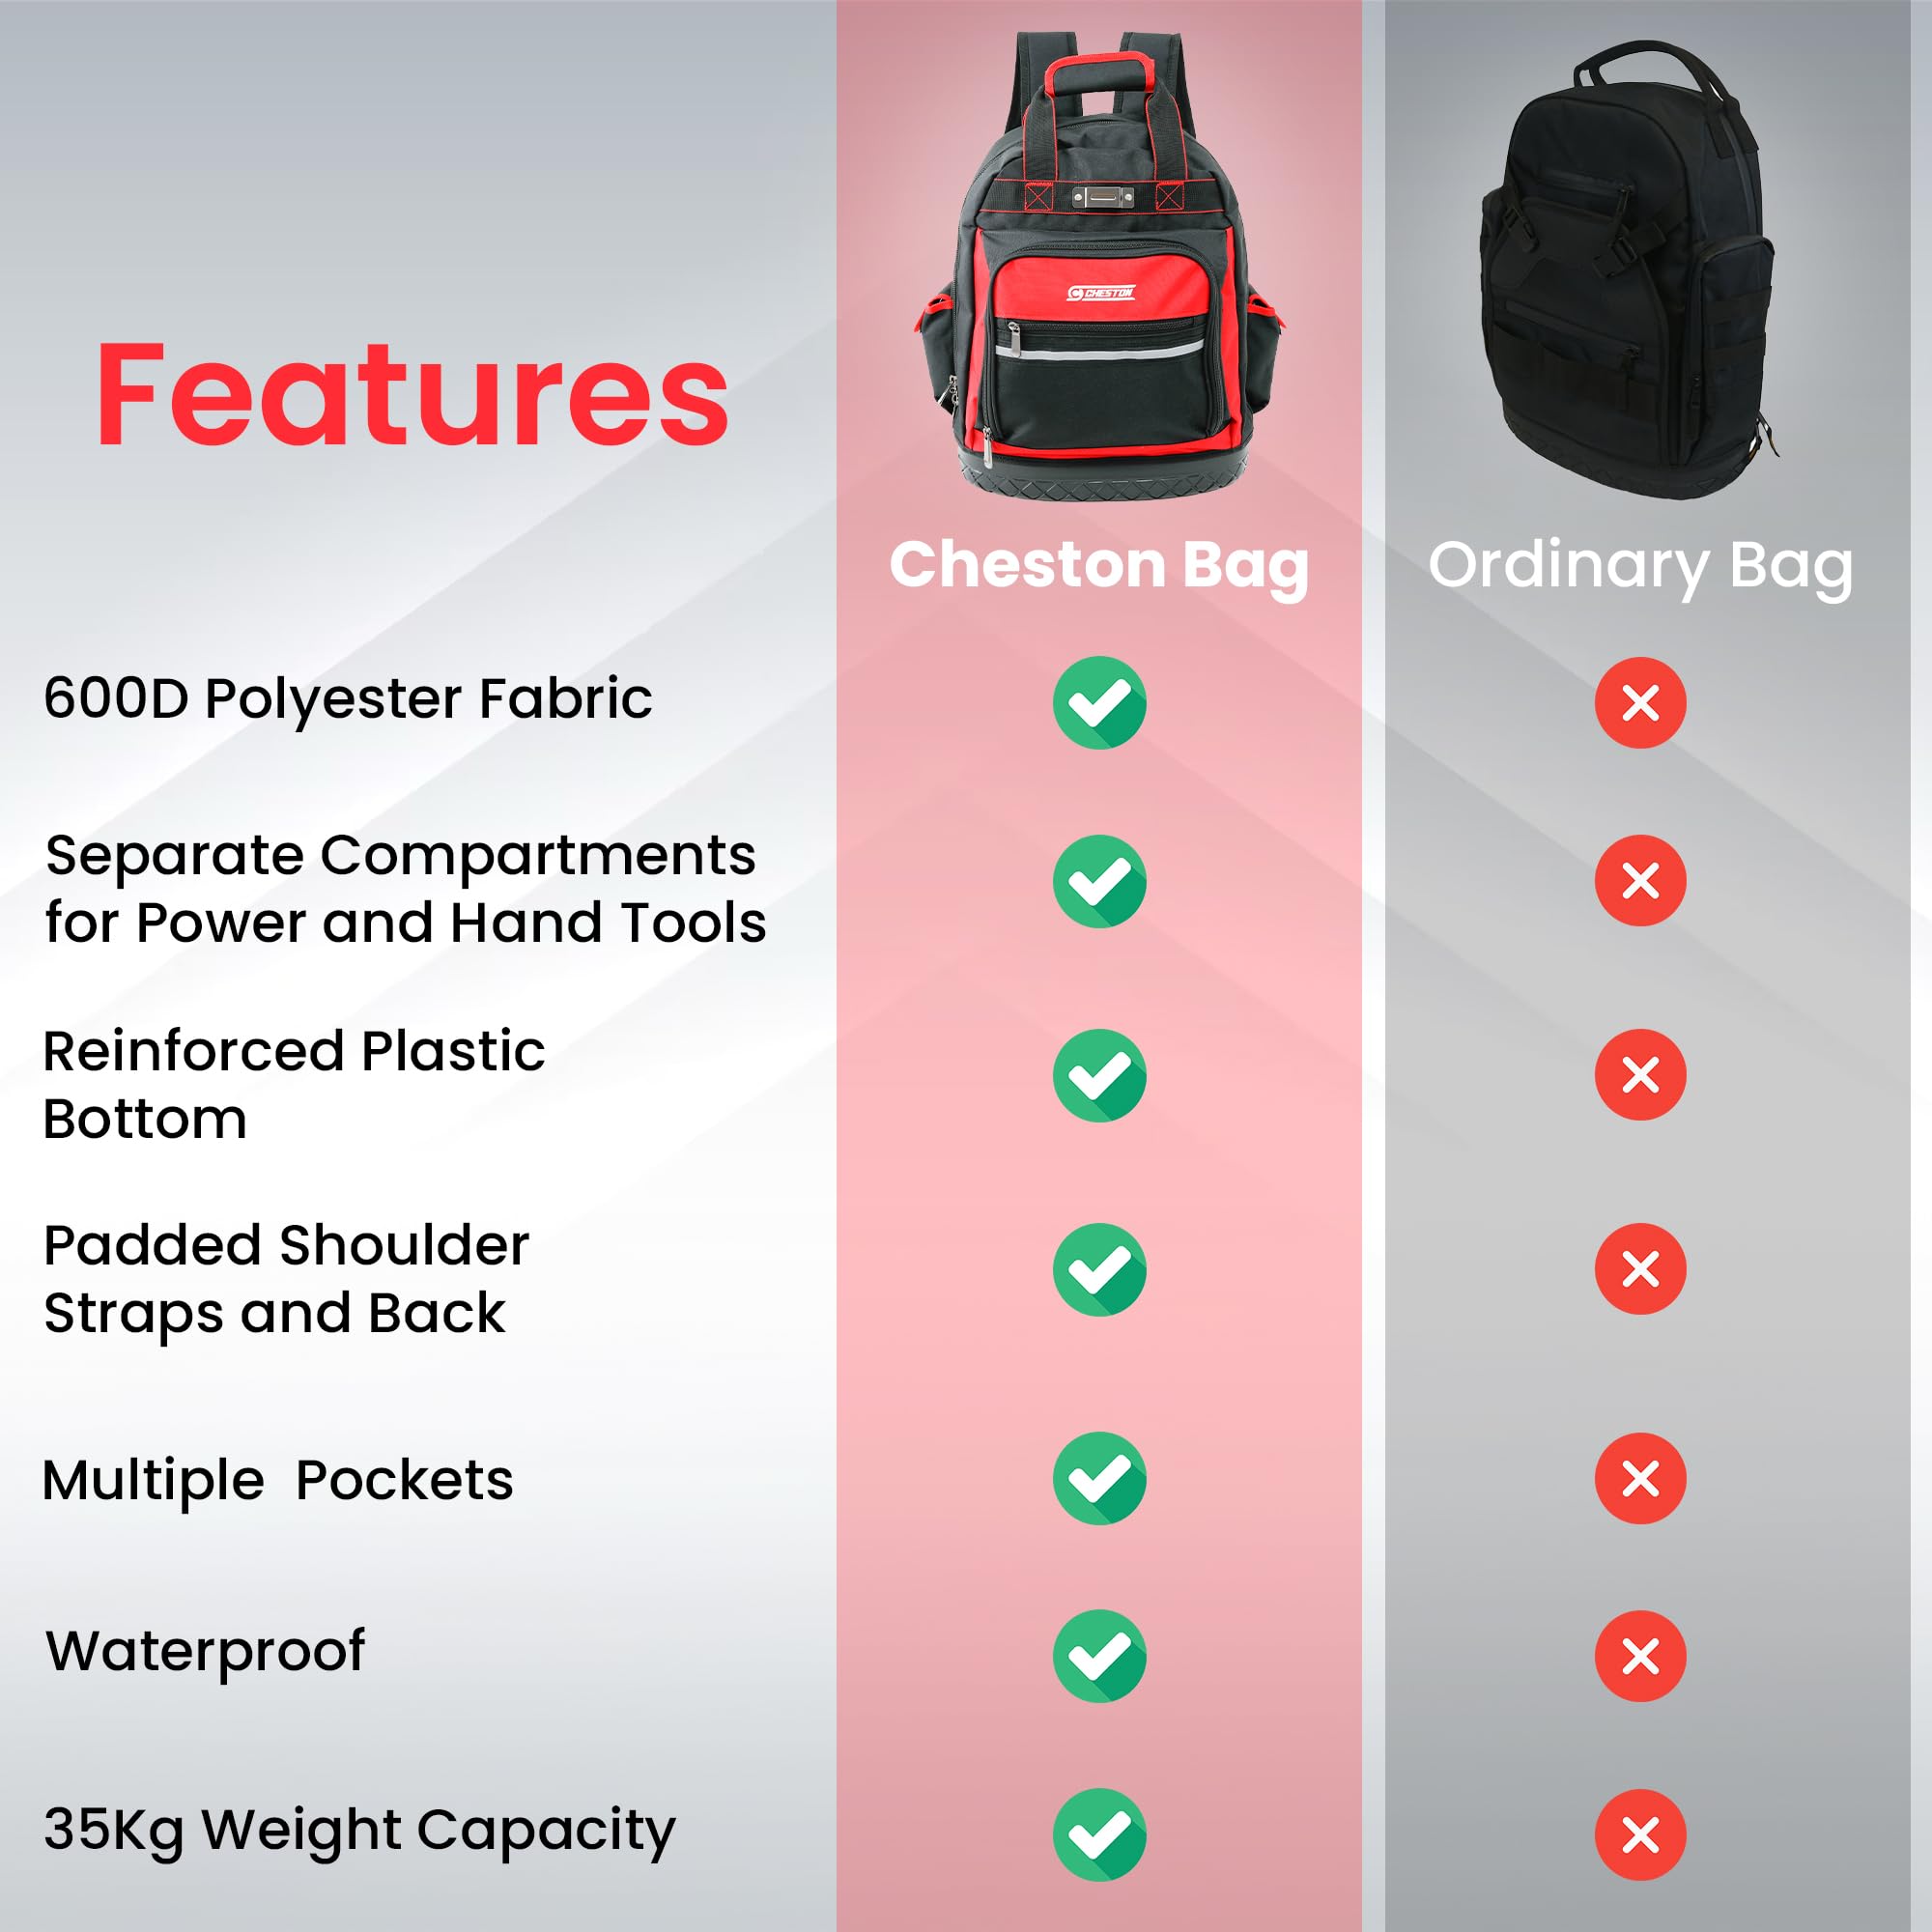 Cheston Ultra Tool Bag Backpack | Tool Organiser 50+ Multiple Compartments for Tools and Padded Handles | 15 kg Load Capacity I Heavy Duty & Water proof I For Professional Plumber Electricians